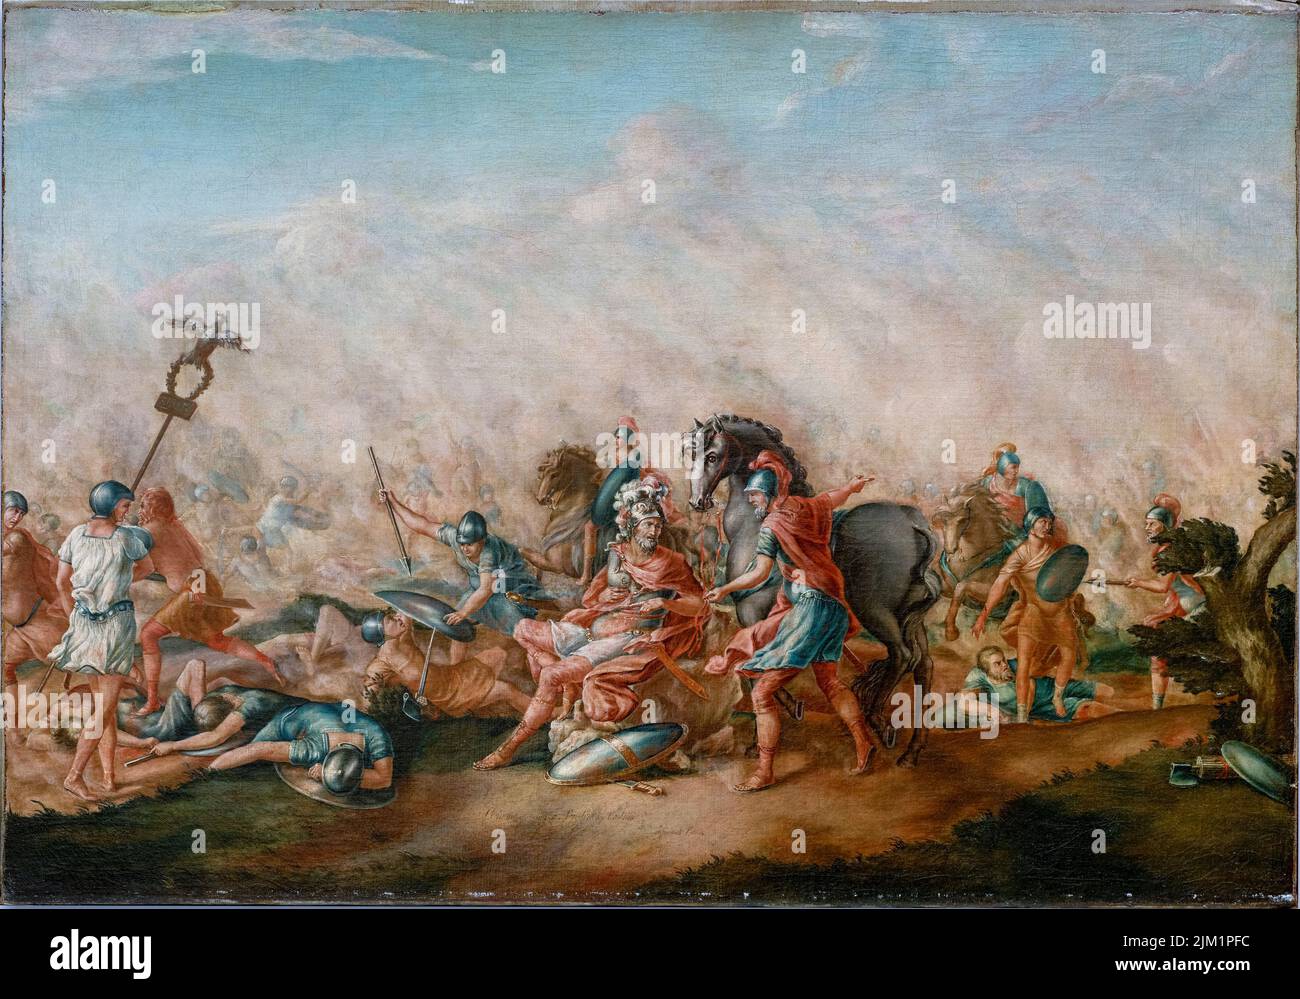 The Death of Paulus Aemilius at the Battle of Cannae, painting in oil on canvas by John Trumbull, 1773 Stock Photo